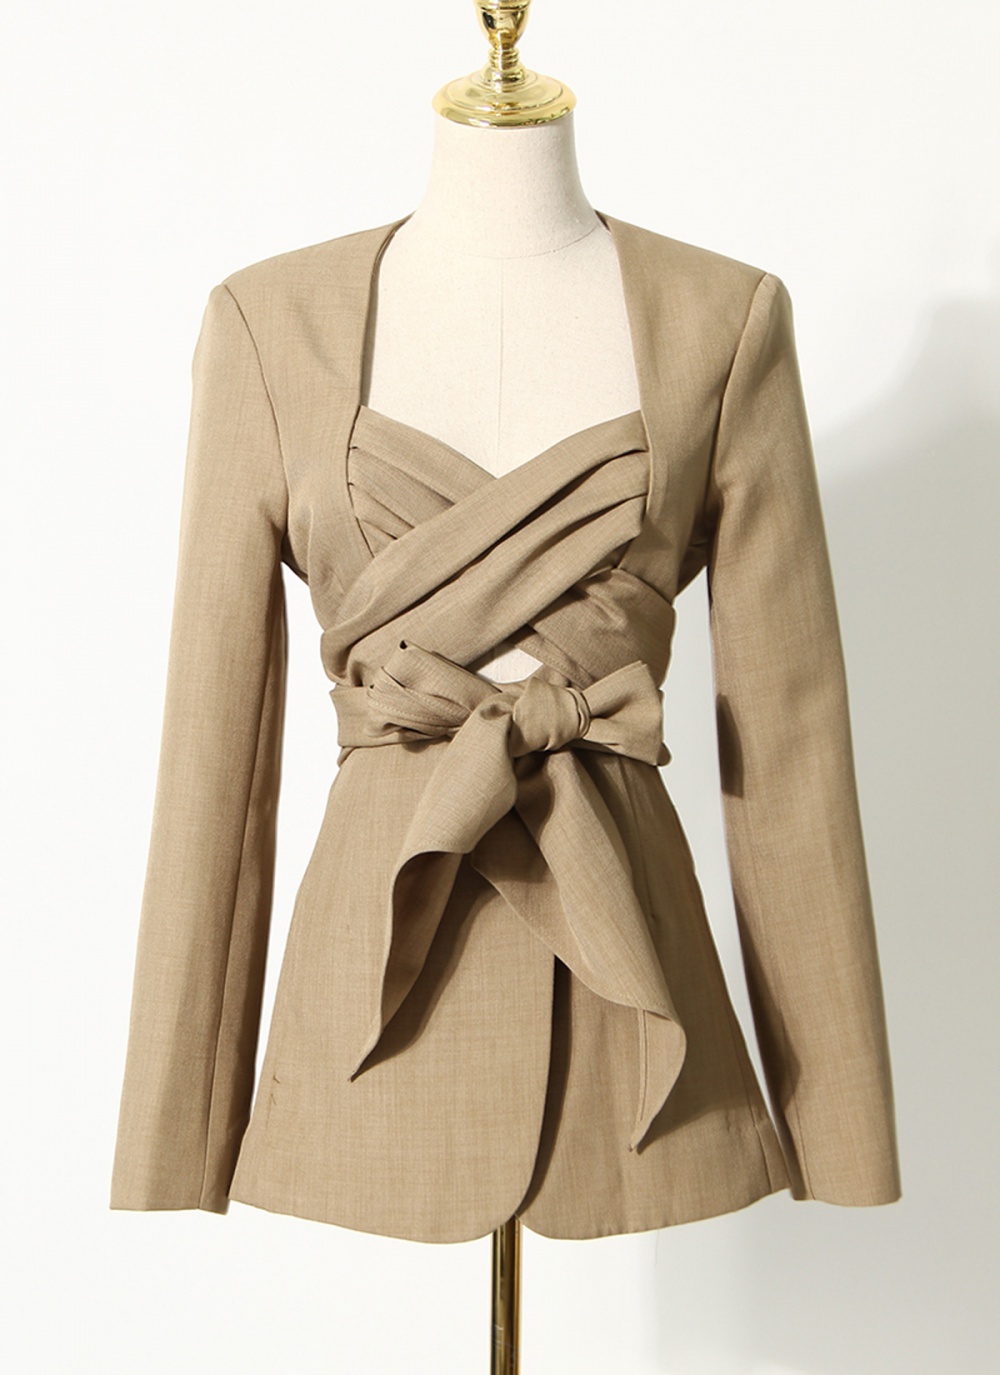 Slim bandage simple business suit bow pure personality coat